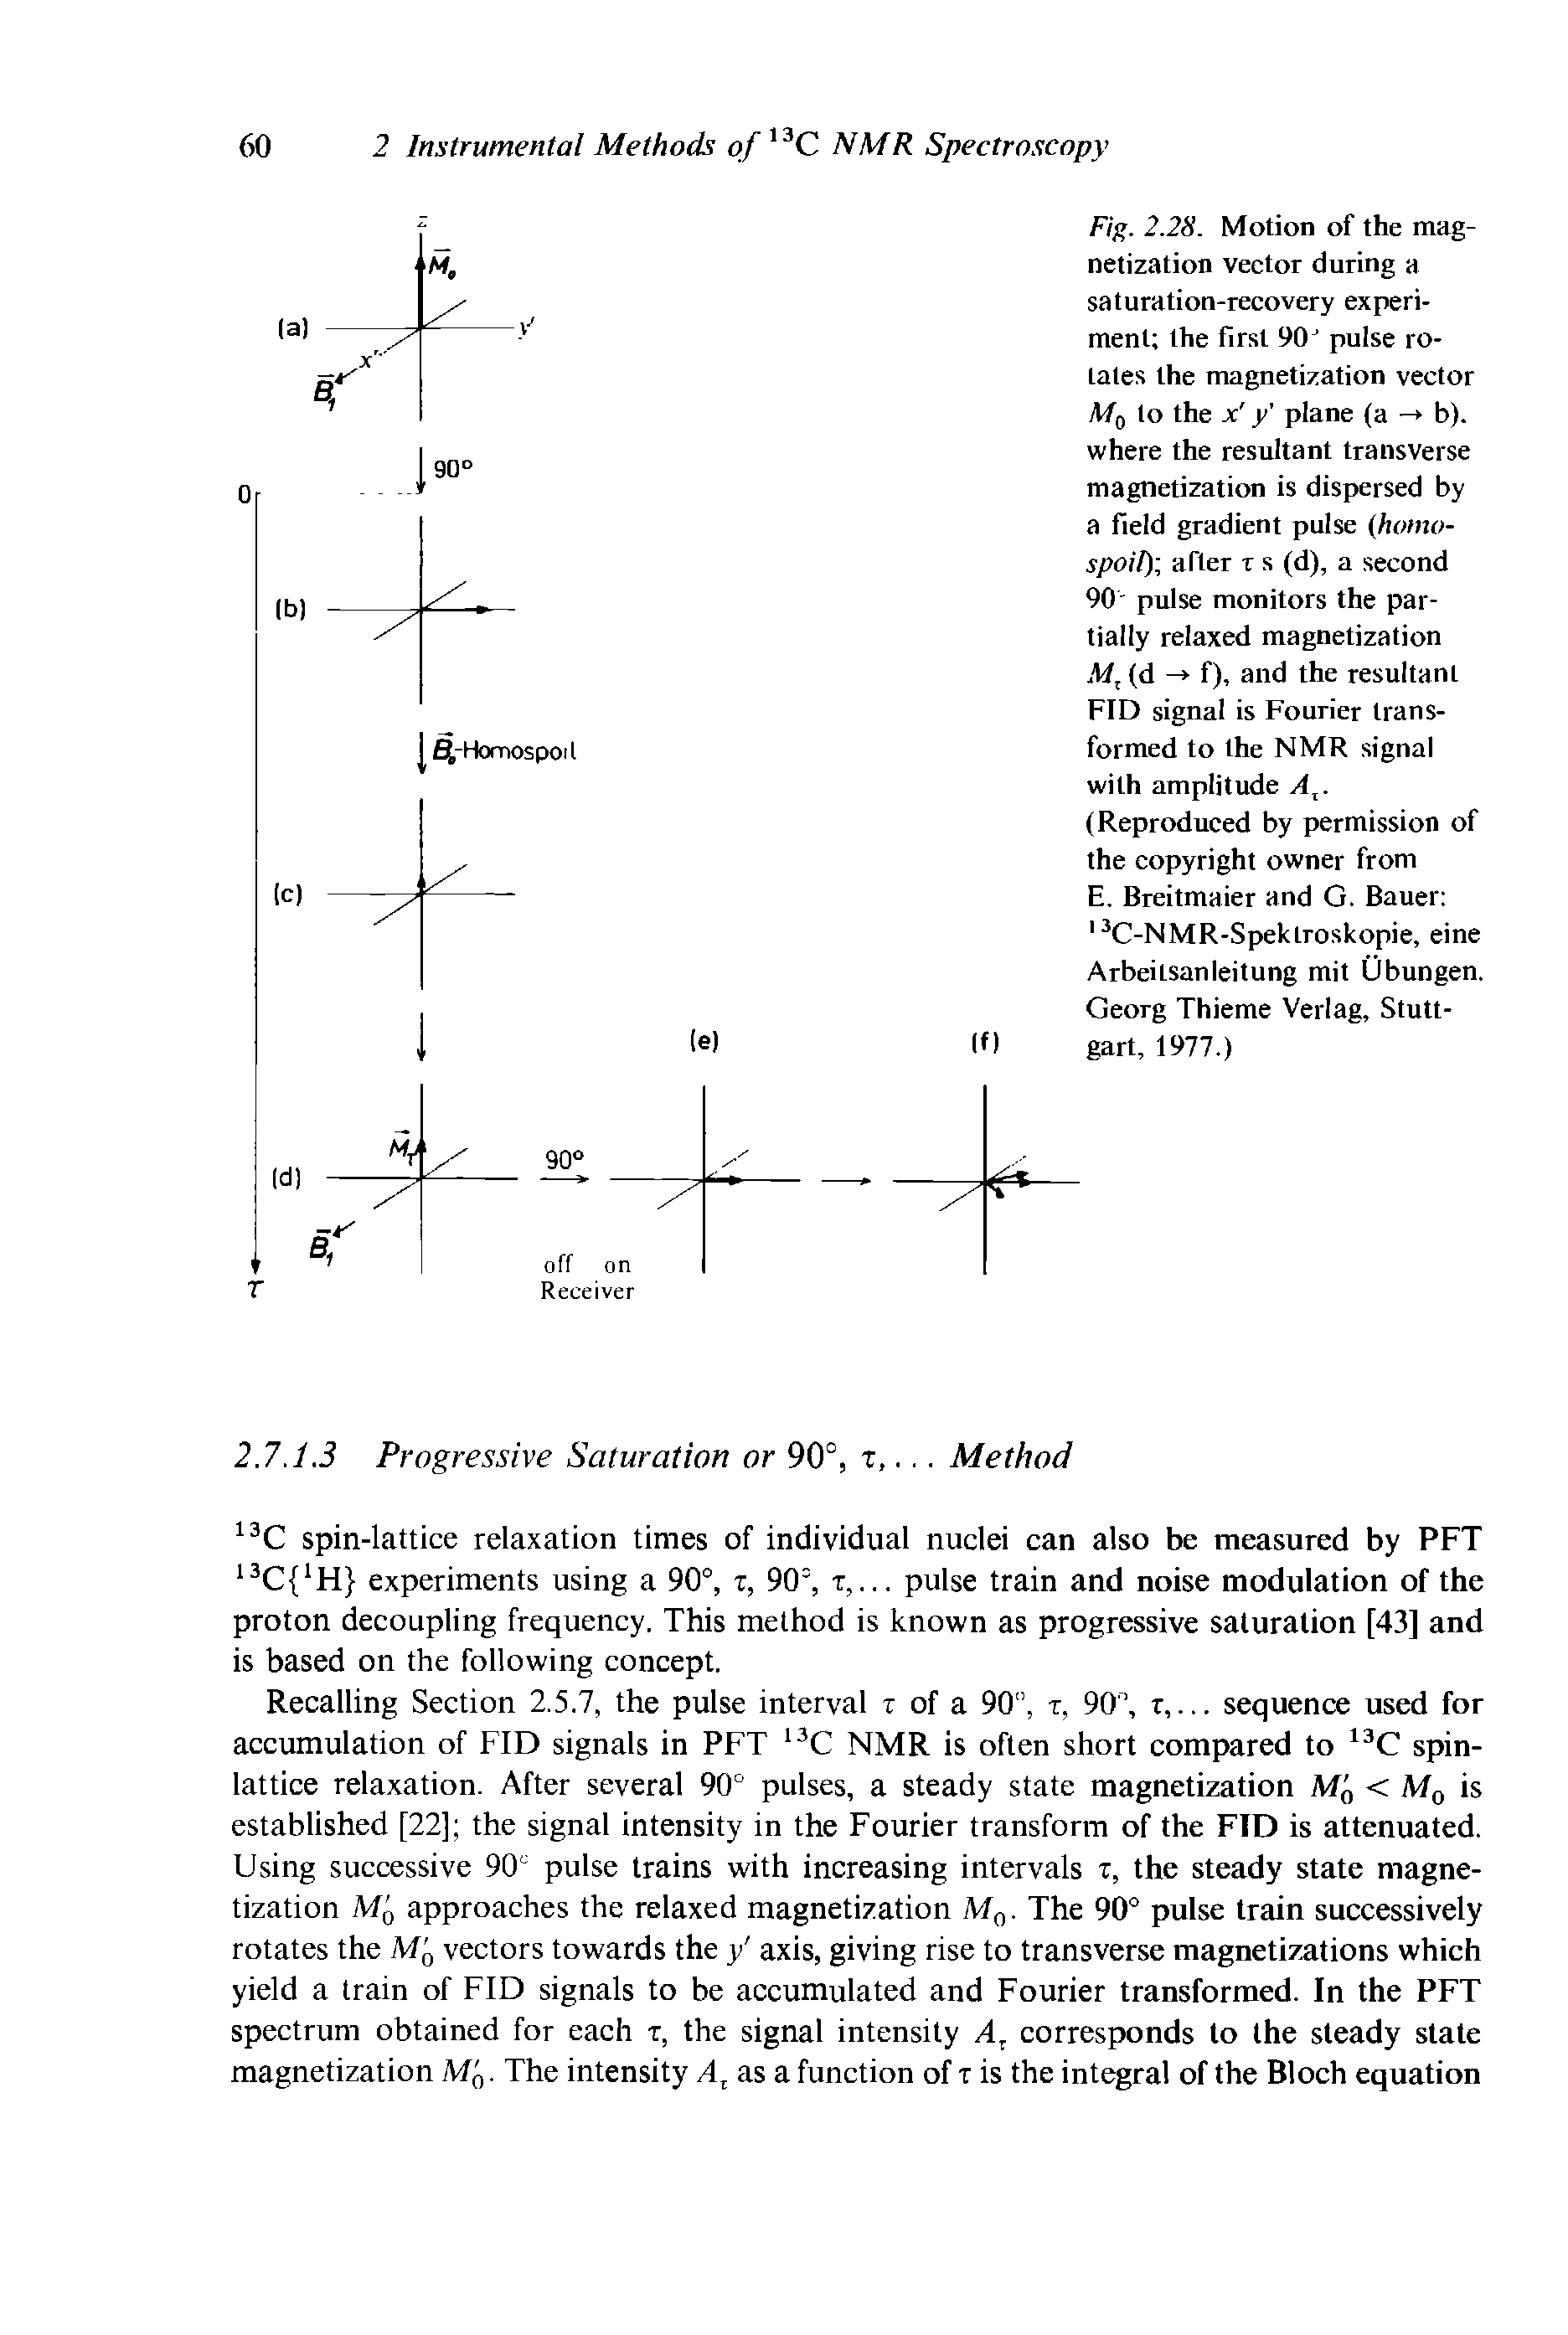 Fig. 2.28. Motion of the magnetization vector during a saturation-recovery experiment the first 90J pulse rotates the magnetization vector M0 to the x y plane (a -> b). where the resultant transverse magnetization is dispersed by a field gradient pulse (homo-spoil) after r s (d), a second 90 pulse monitors the partially relaxed magnetization Mt (d - f), and the resultant FID signal is Fourier transformed to the NMR signal with amplitude Ax. (Reproduced by permission of the copyright owner from E. Breitmaier and G. Bauer ...